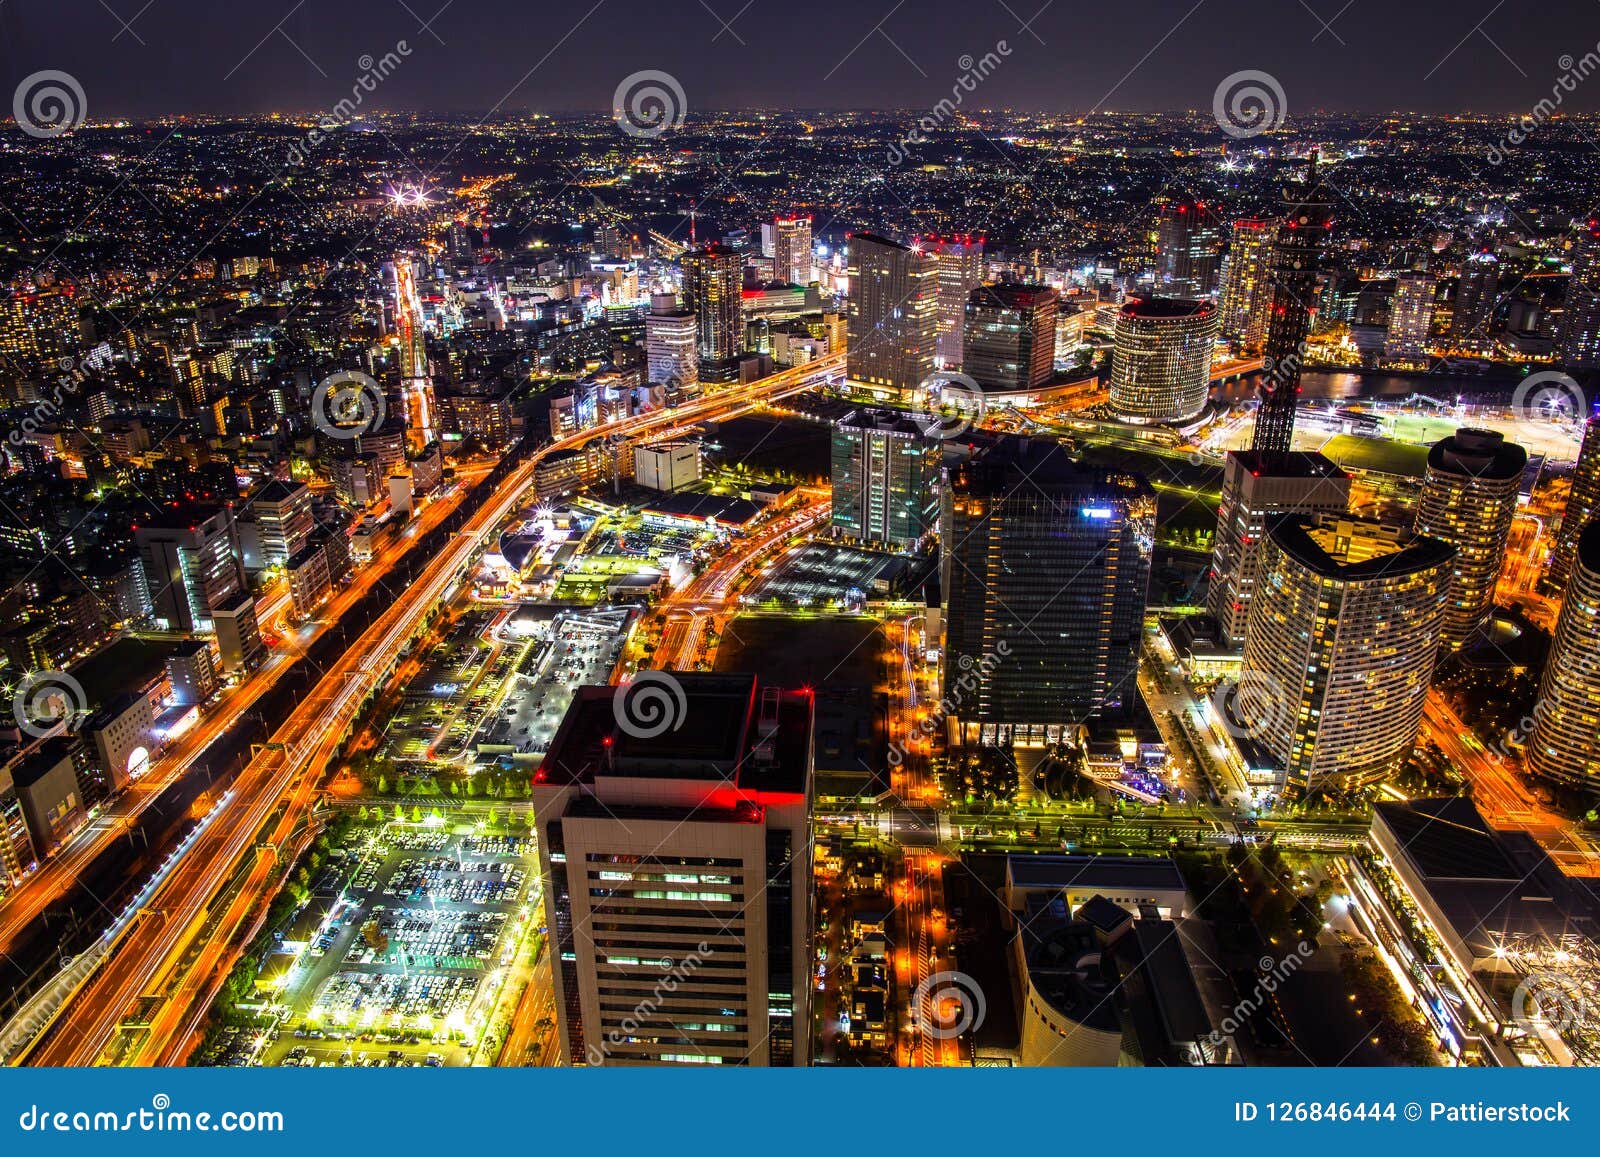 A Colorful Of Cityscape Night Top View Of Yokohama Stock